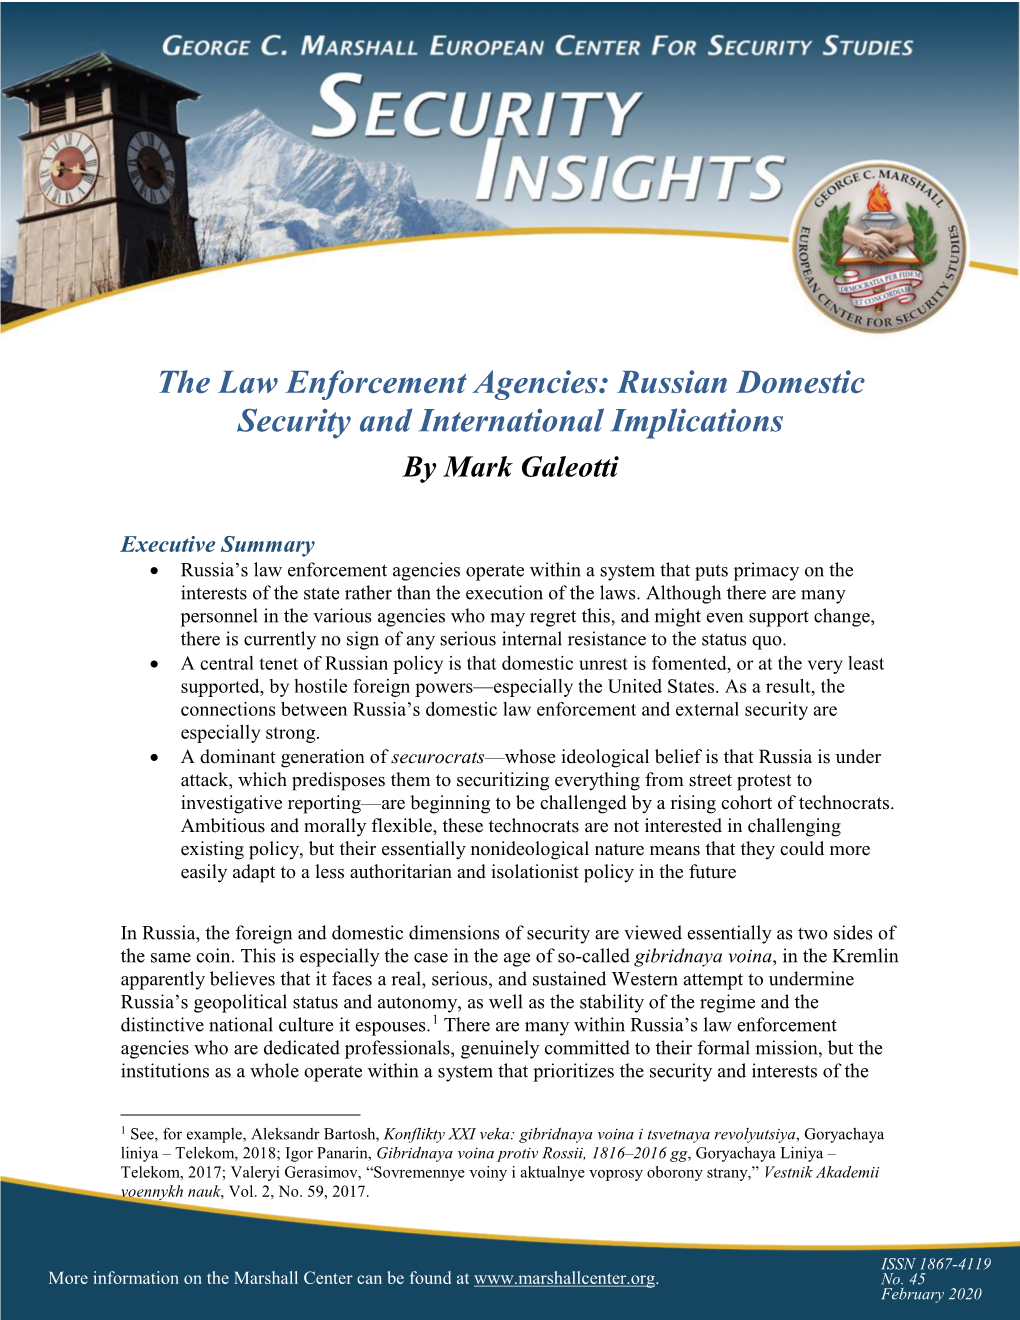 The Law Enforcement Agencies: Russian Domestic Security and International Implications by Mark Galeotti